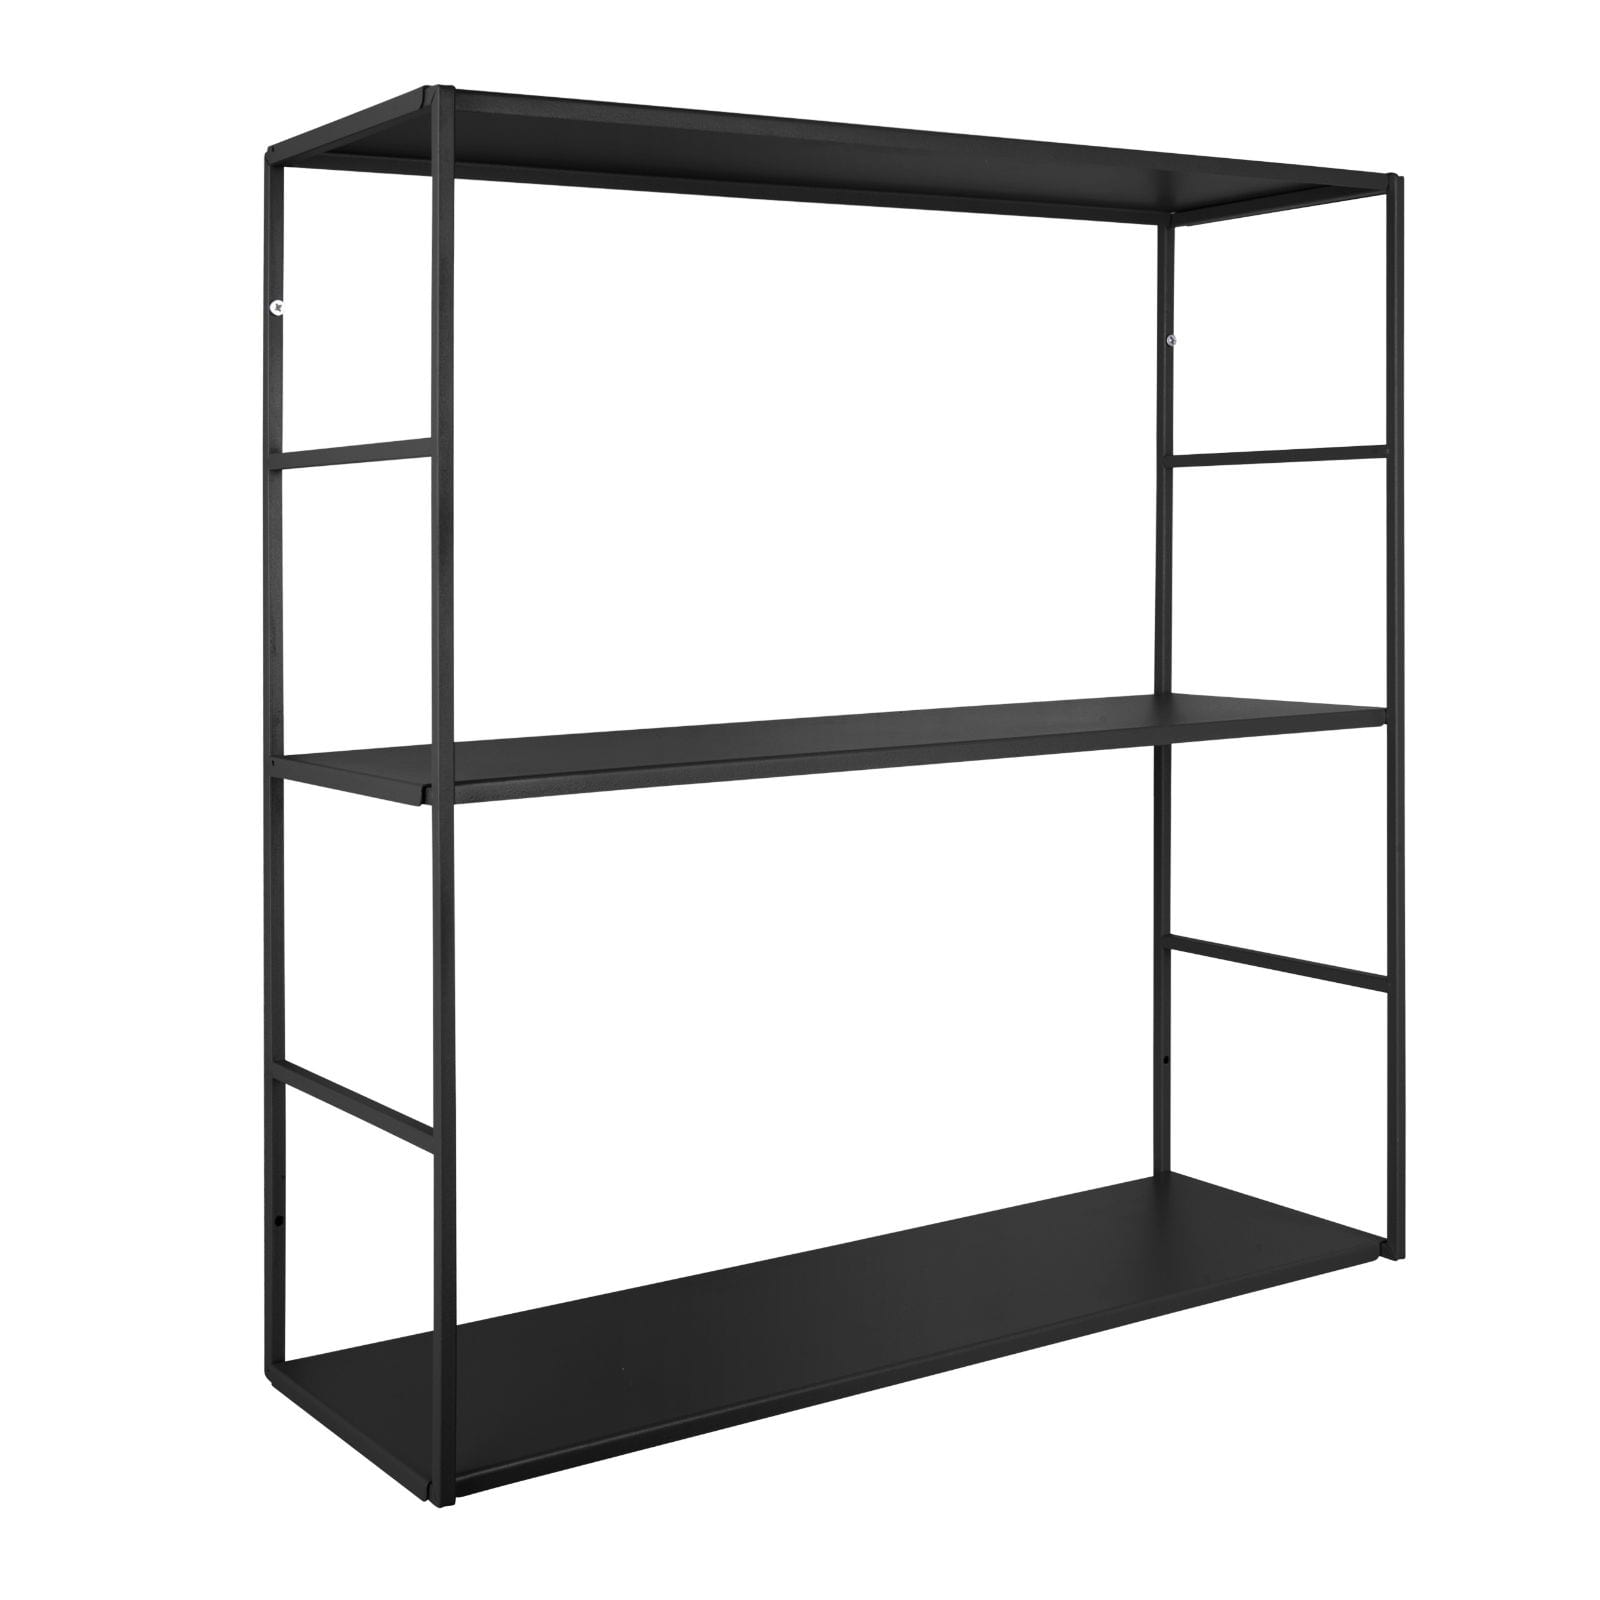 Level Wall Rack Black by Present Time | Design Is This